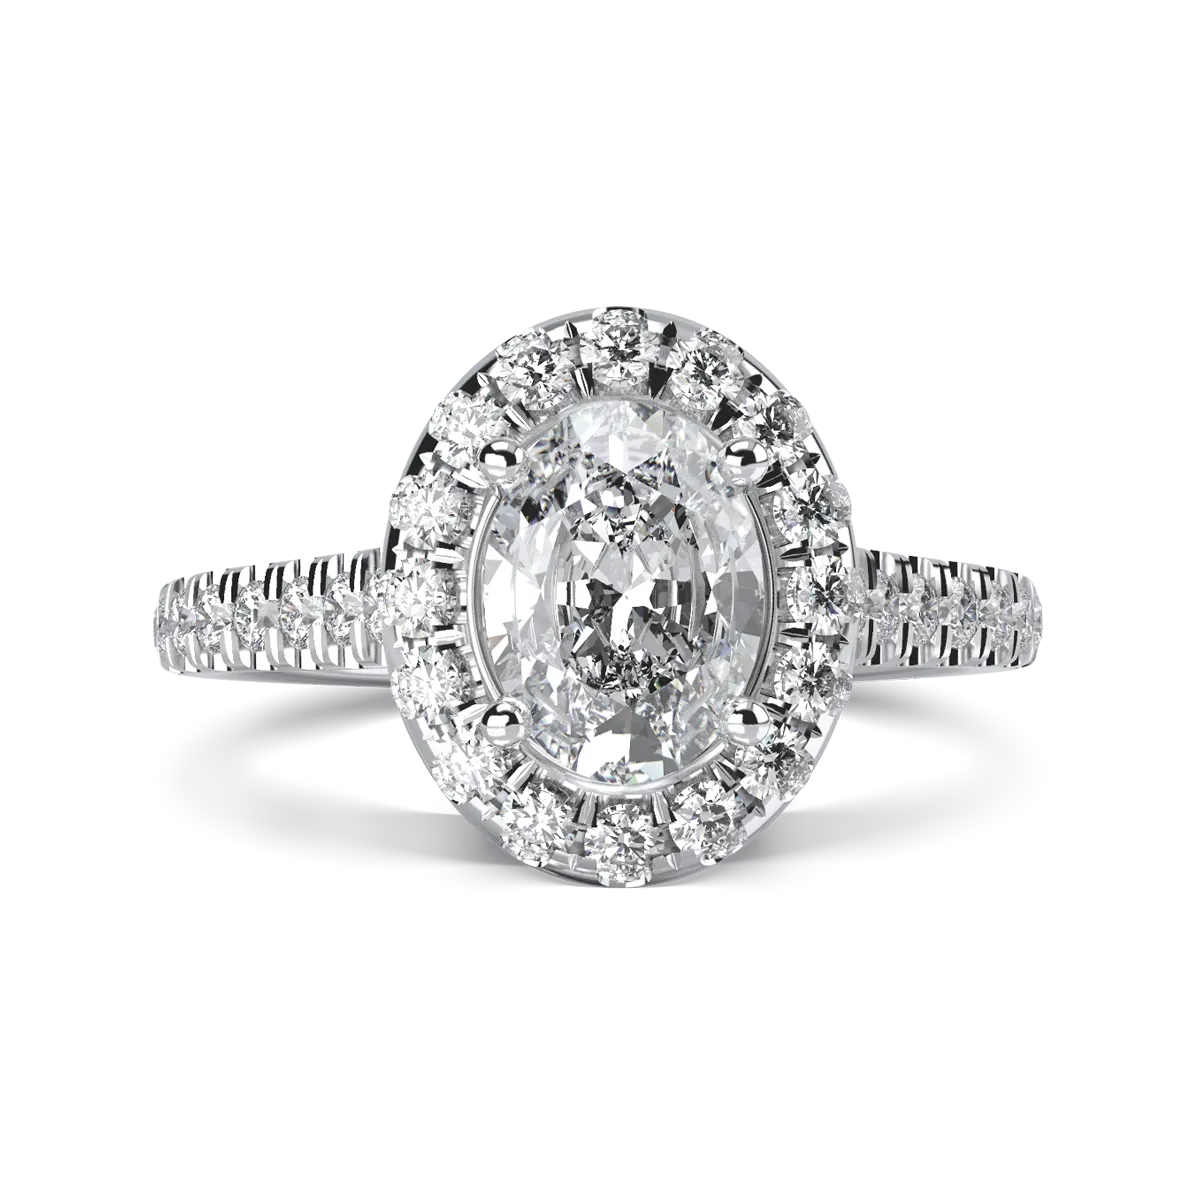 18K white gold engagement ring with 0.8ct diamond and 0.452ct diamonds